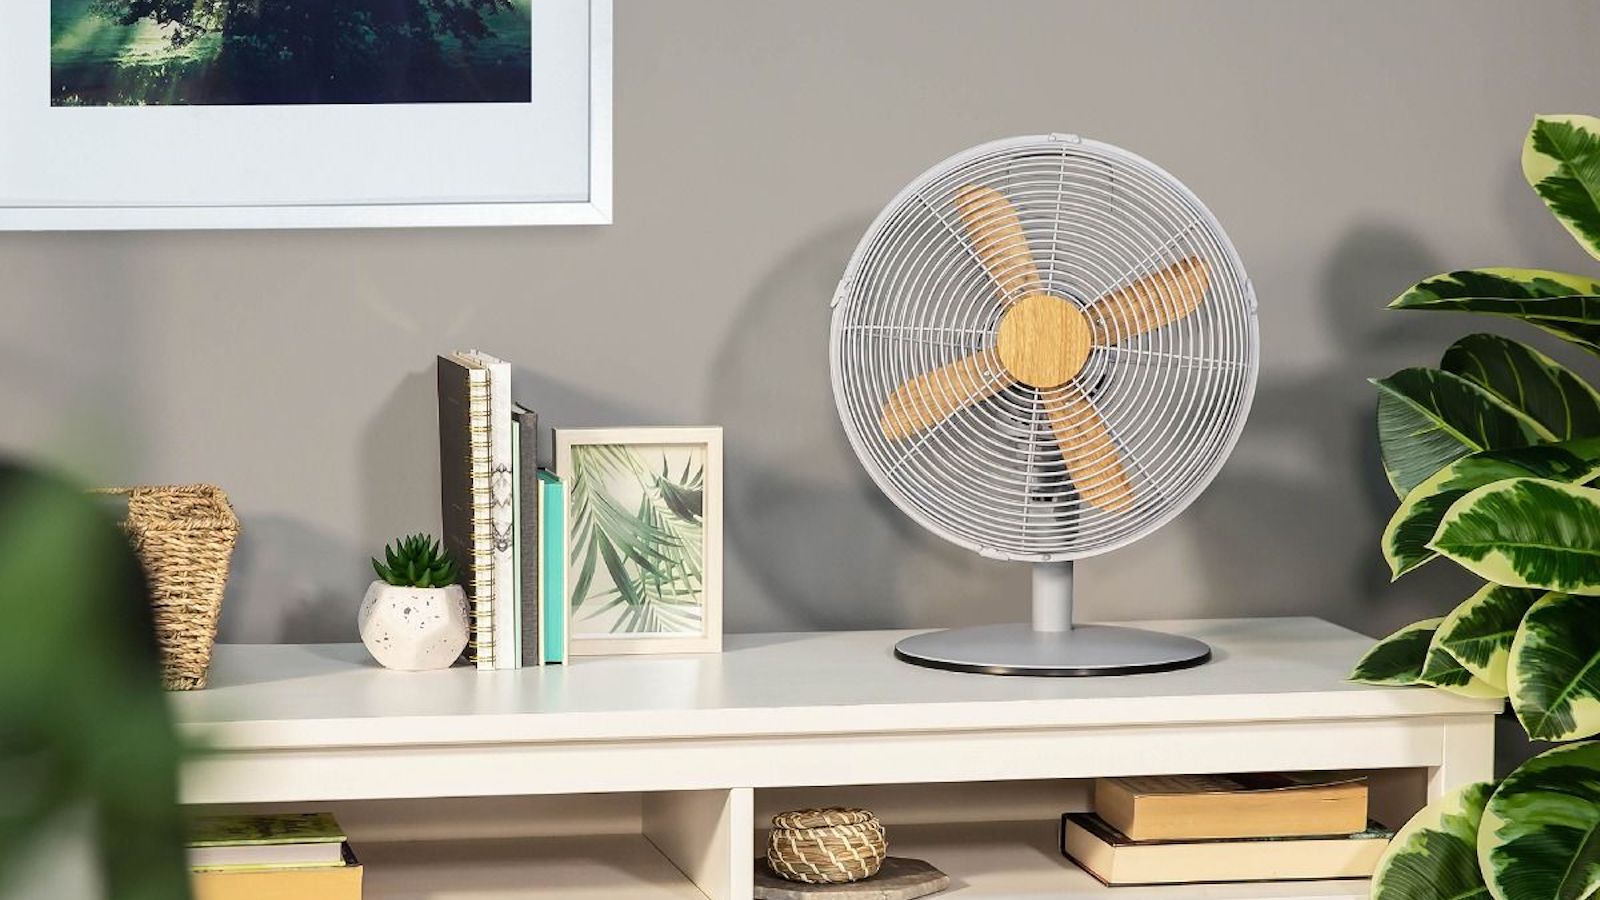 Russell Hobbs 12 inch Scandi fan - Attractive and budget-friendly